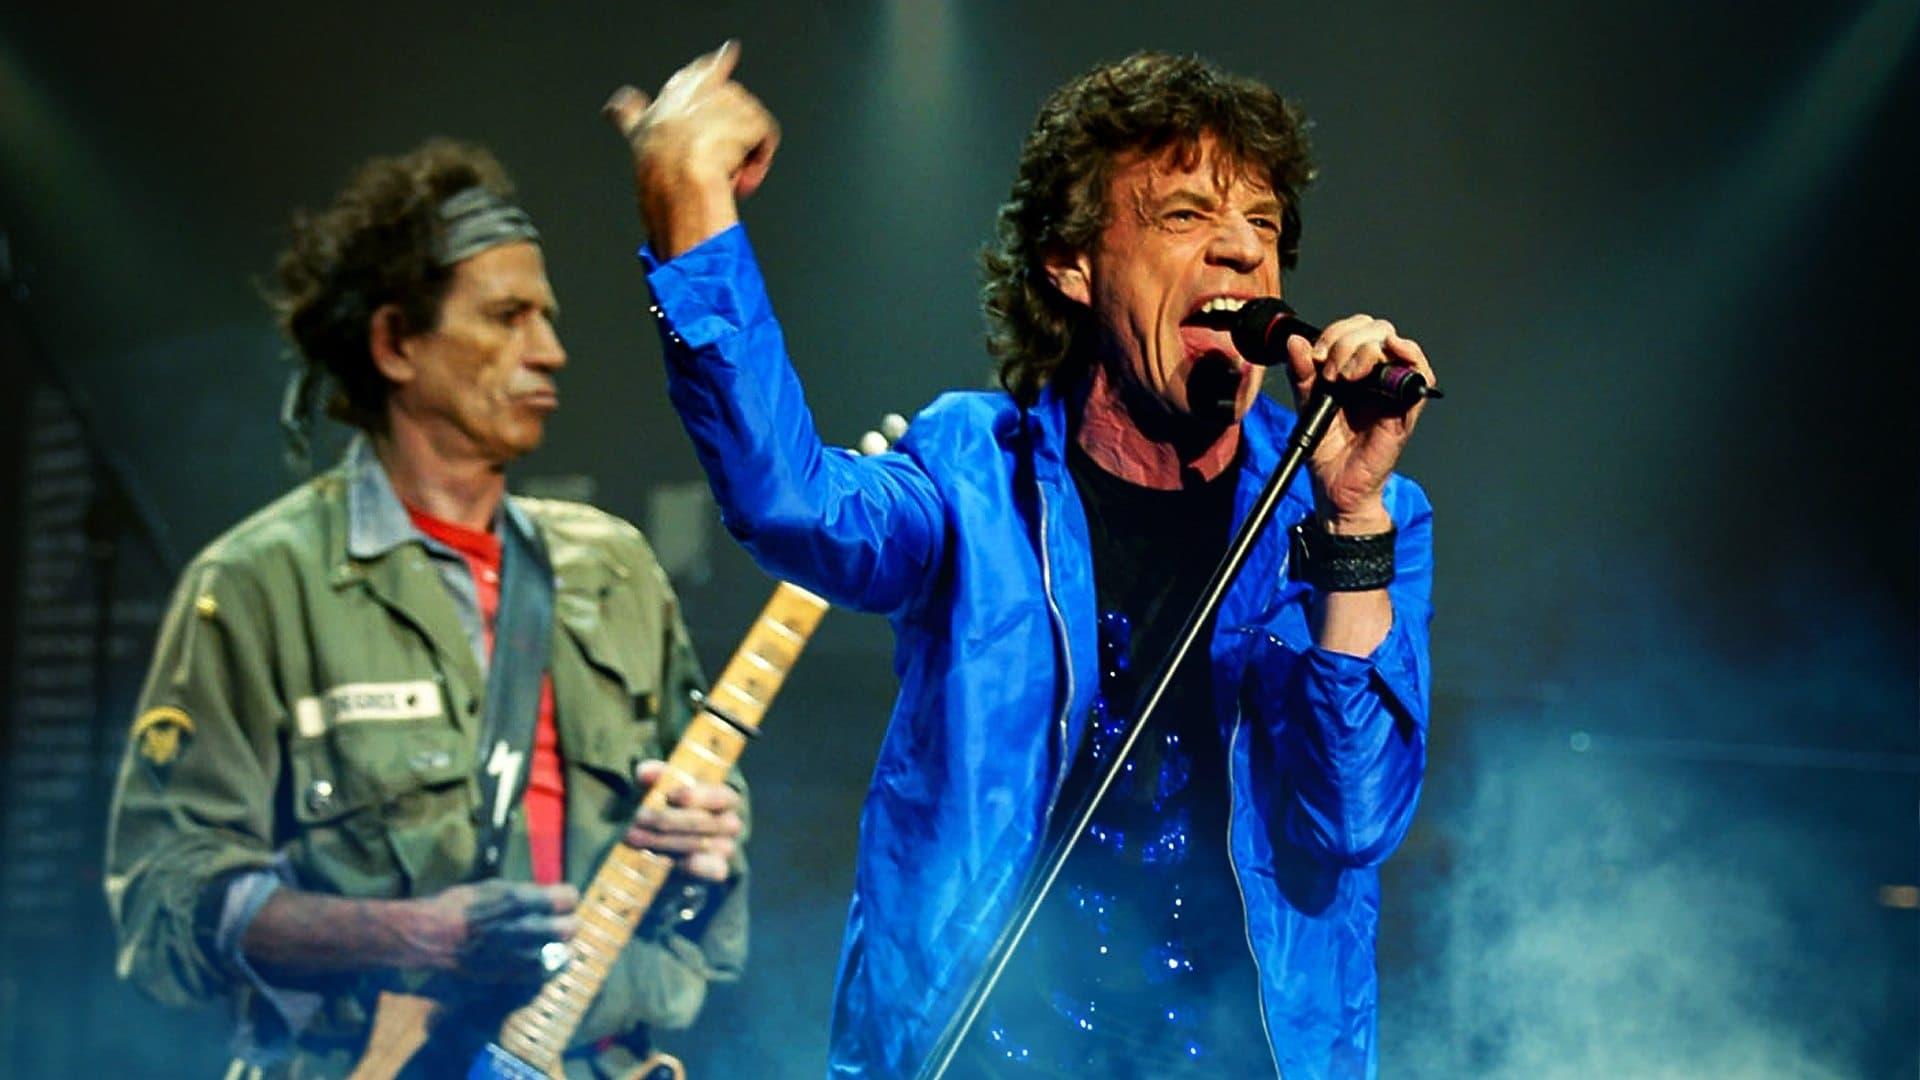 The Rolling Stones – Live at the Wiltern backdrop